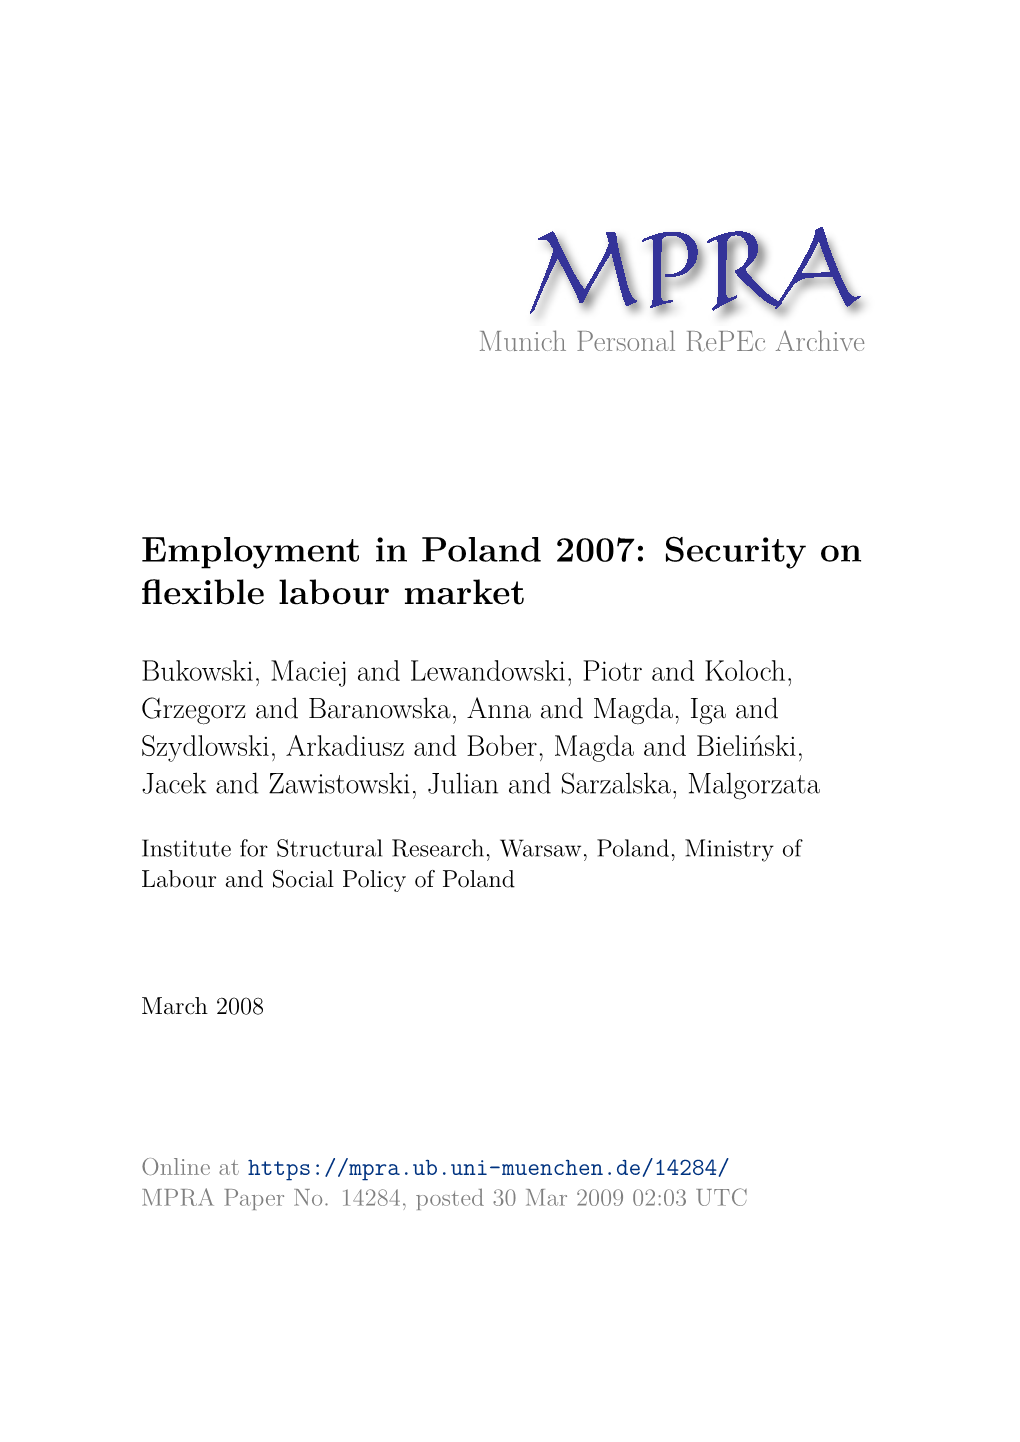 Employment in Poland 2007: Security on Flexible Labour Market